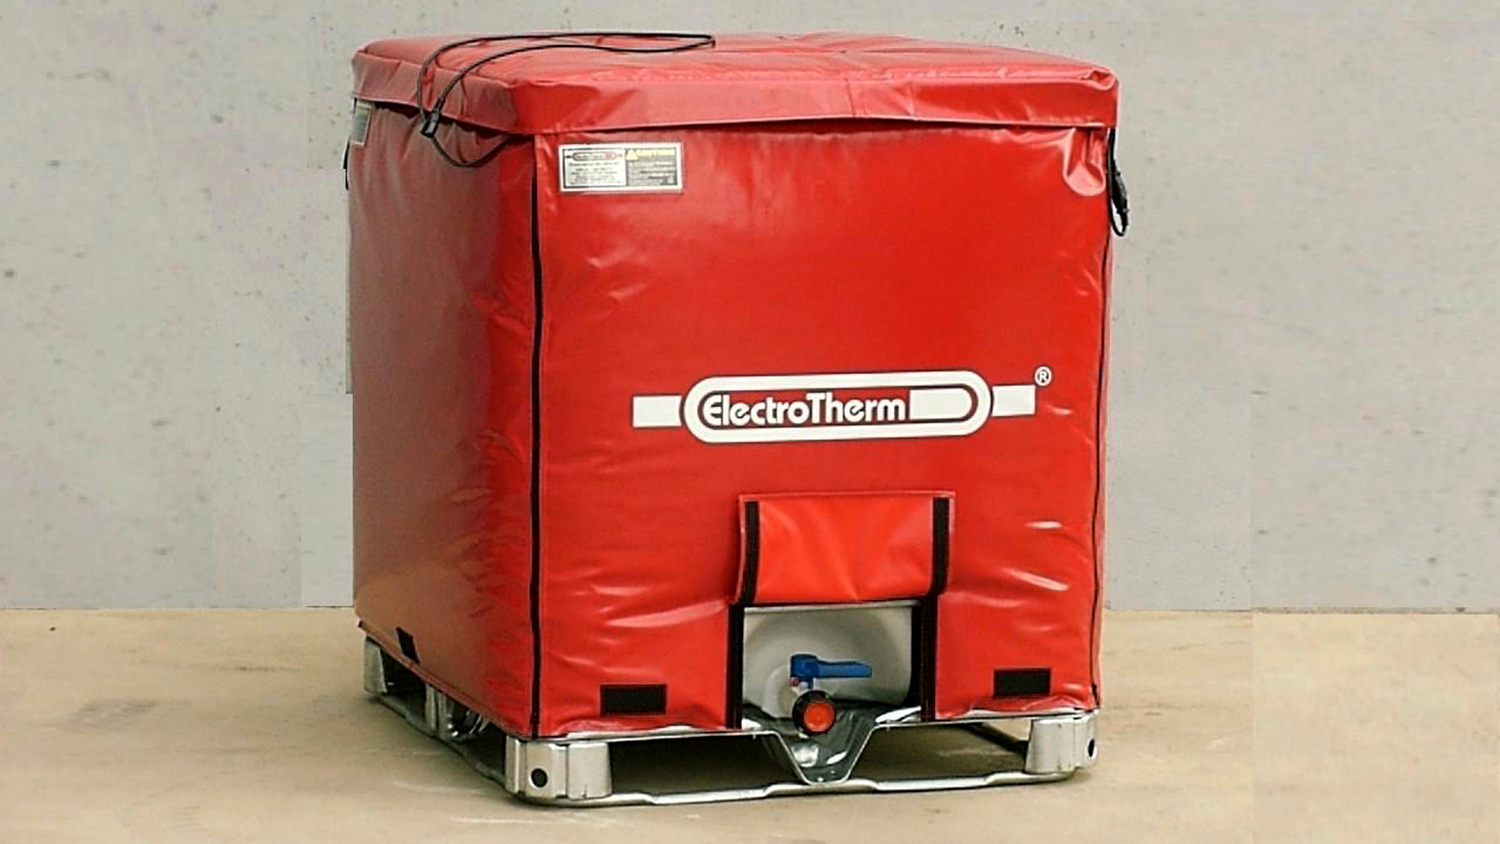 electrotherm-banner-2-1500px